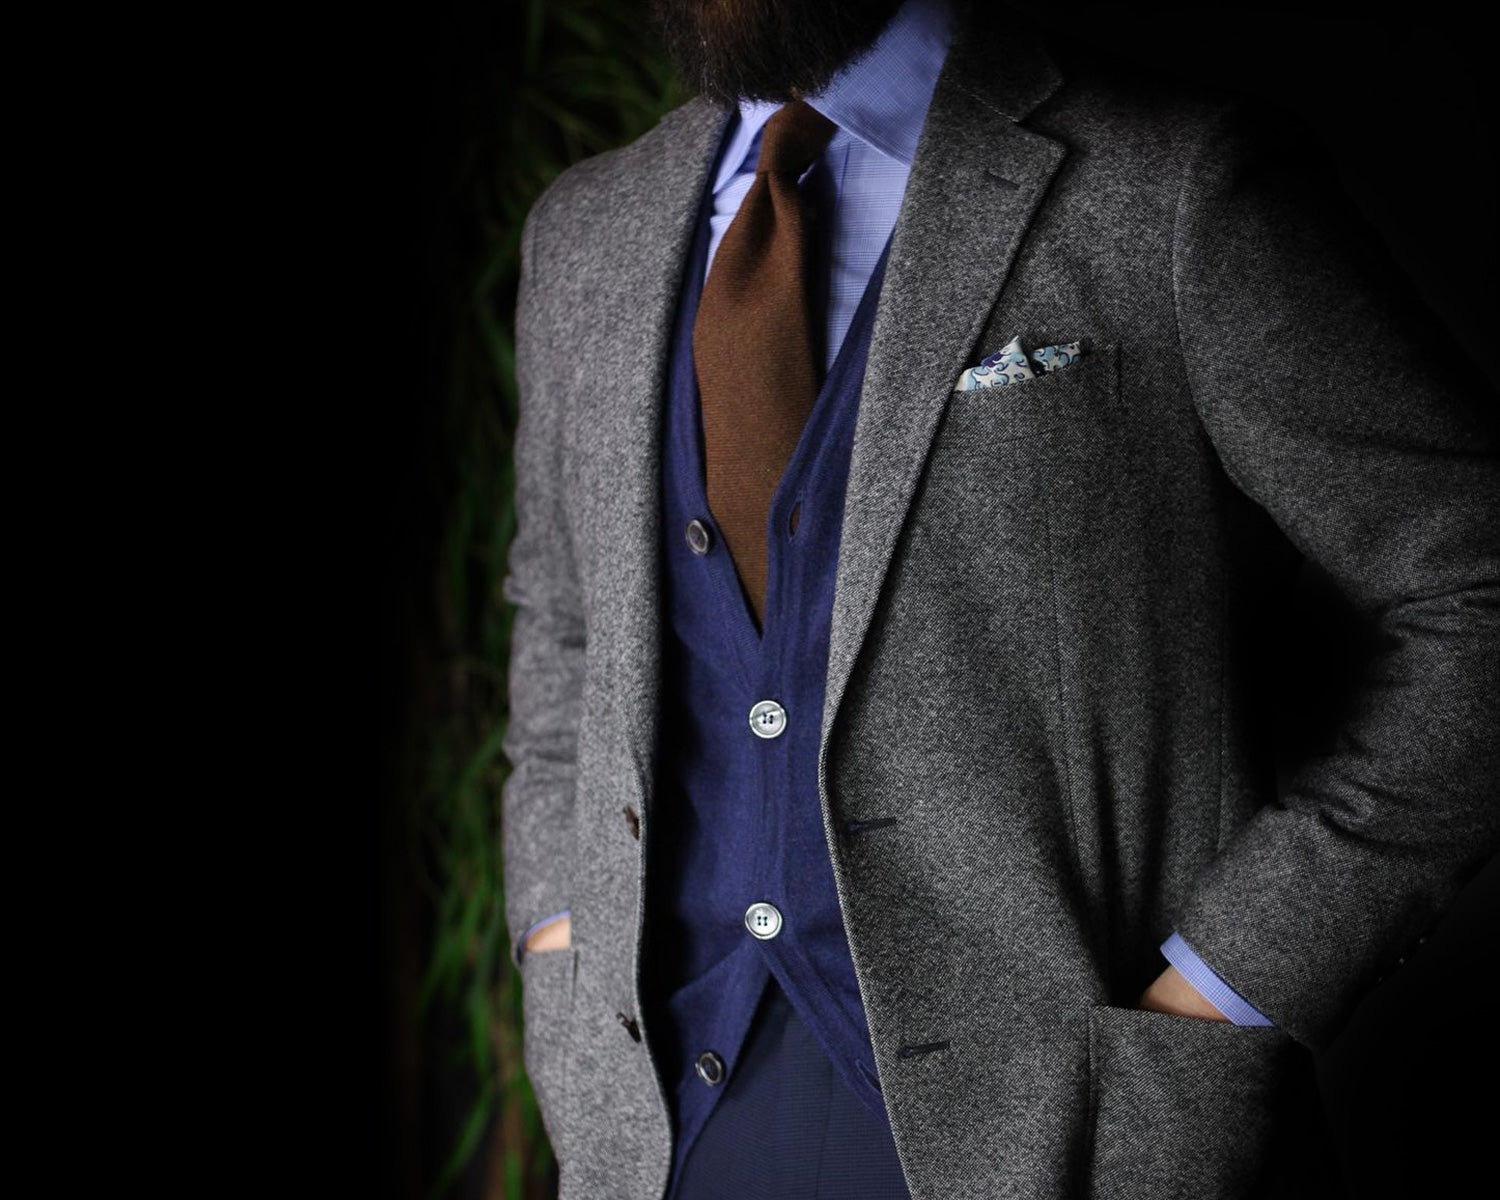 Light grey blazer with blue vest and trousers paired with brown tie.